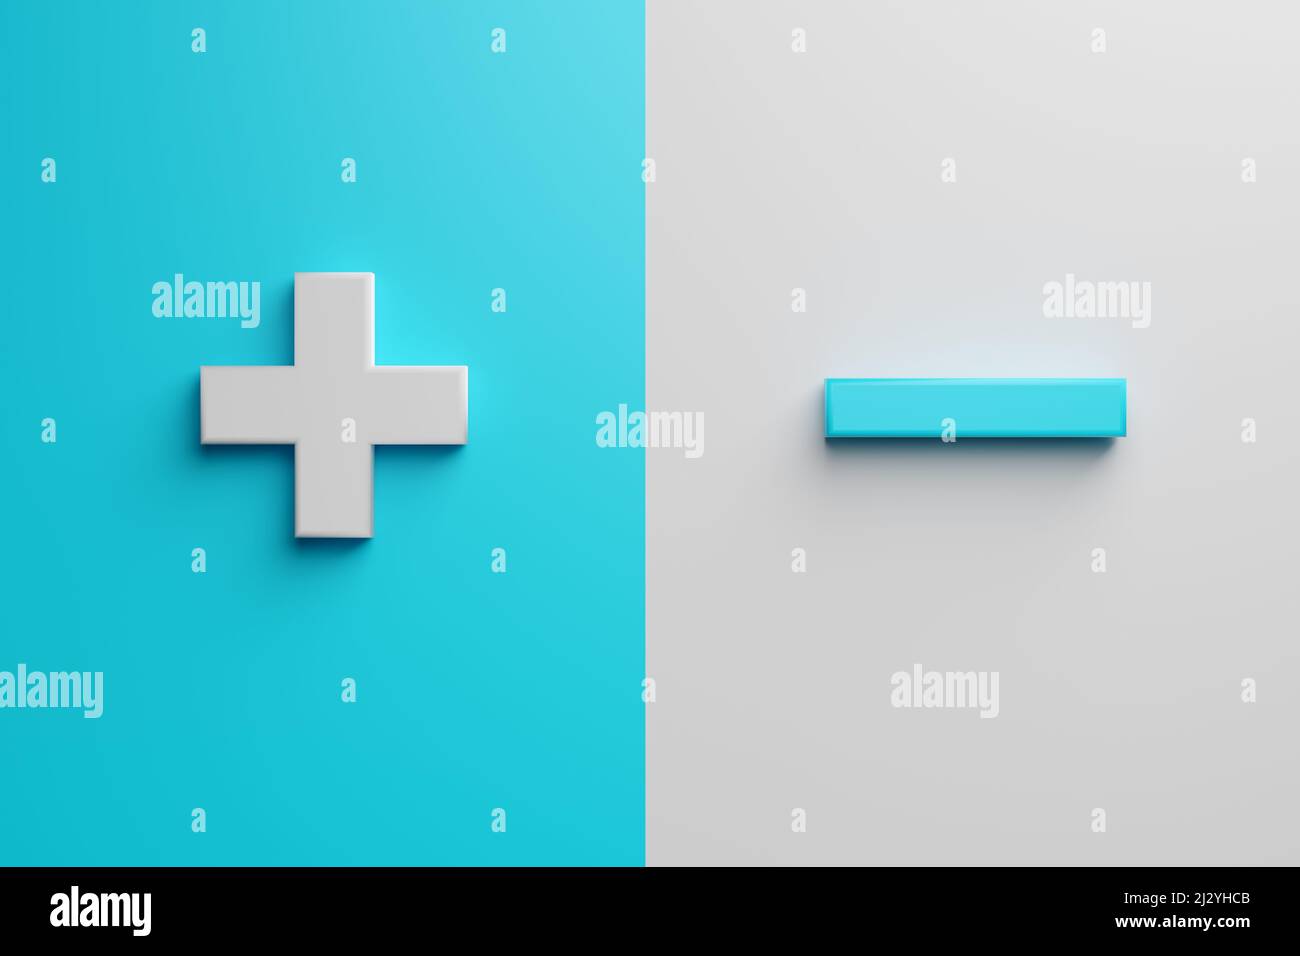 Negative and positive or plus and minus icons on white and blue background. Pros and cons or decision making under uncertainty concept. Stock Photo